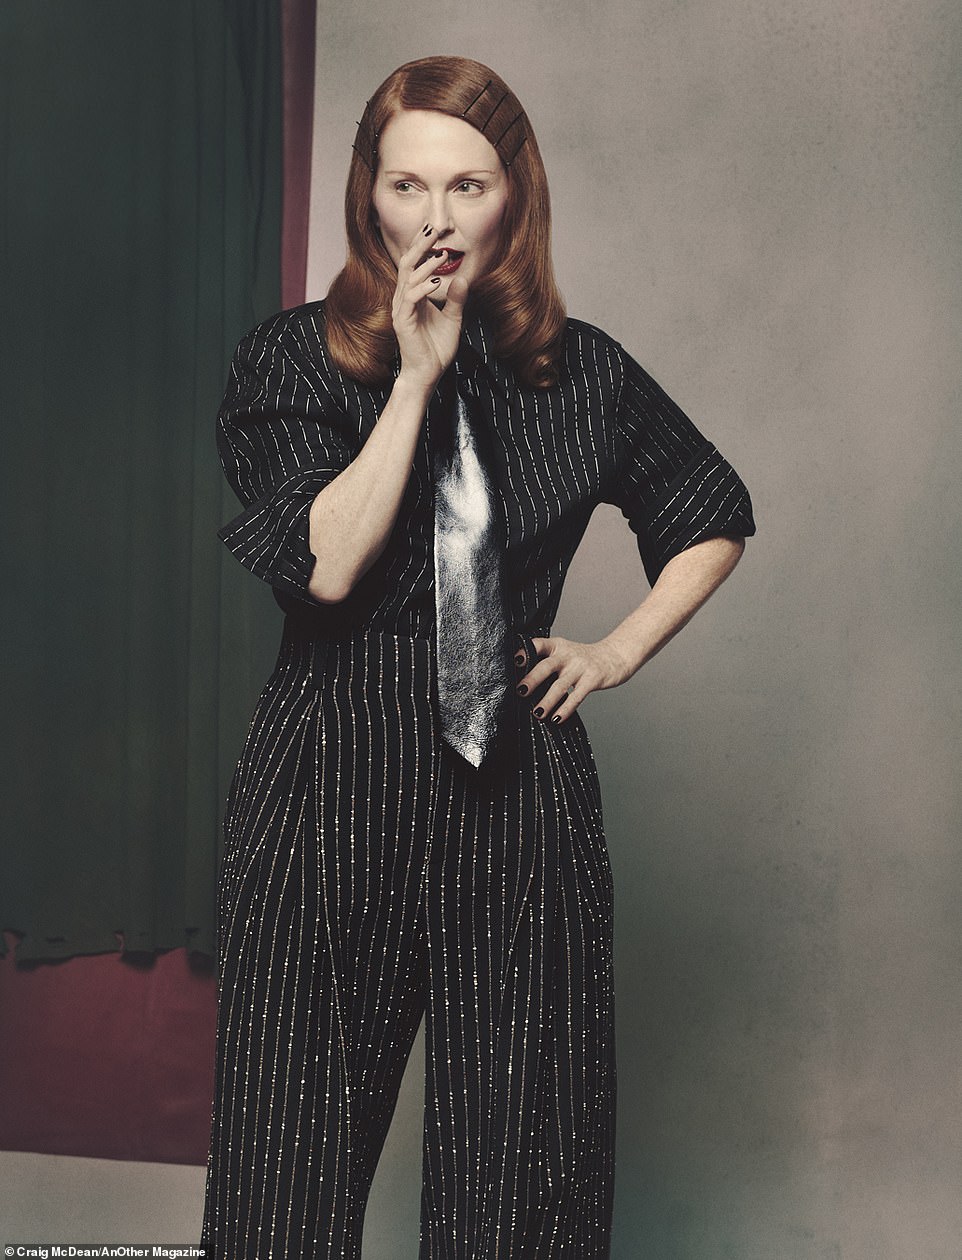 Julianne appears to be up to something in a Bottega Veneta top and pants.